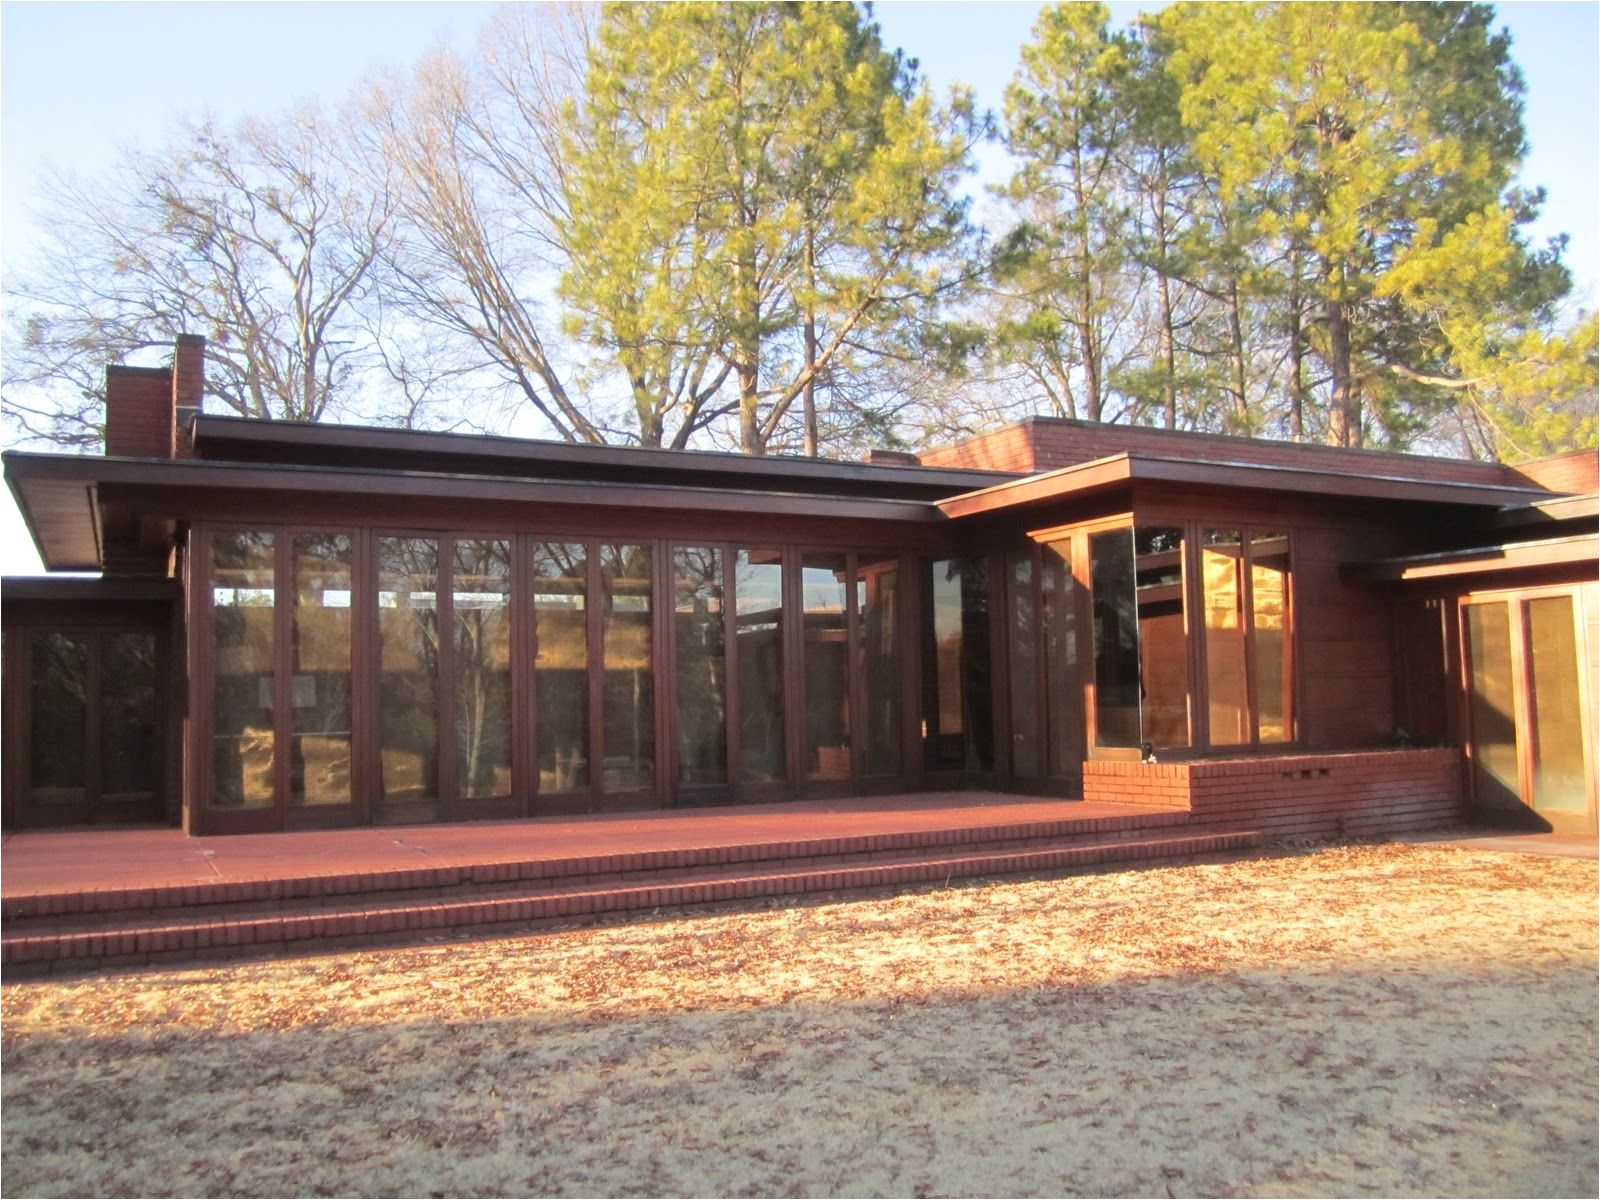 wheres elsie a visit to the only frank lloyd wright house in alabama the